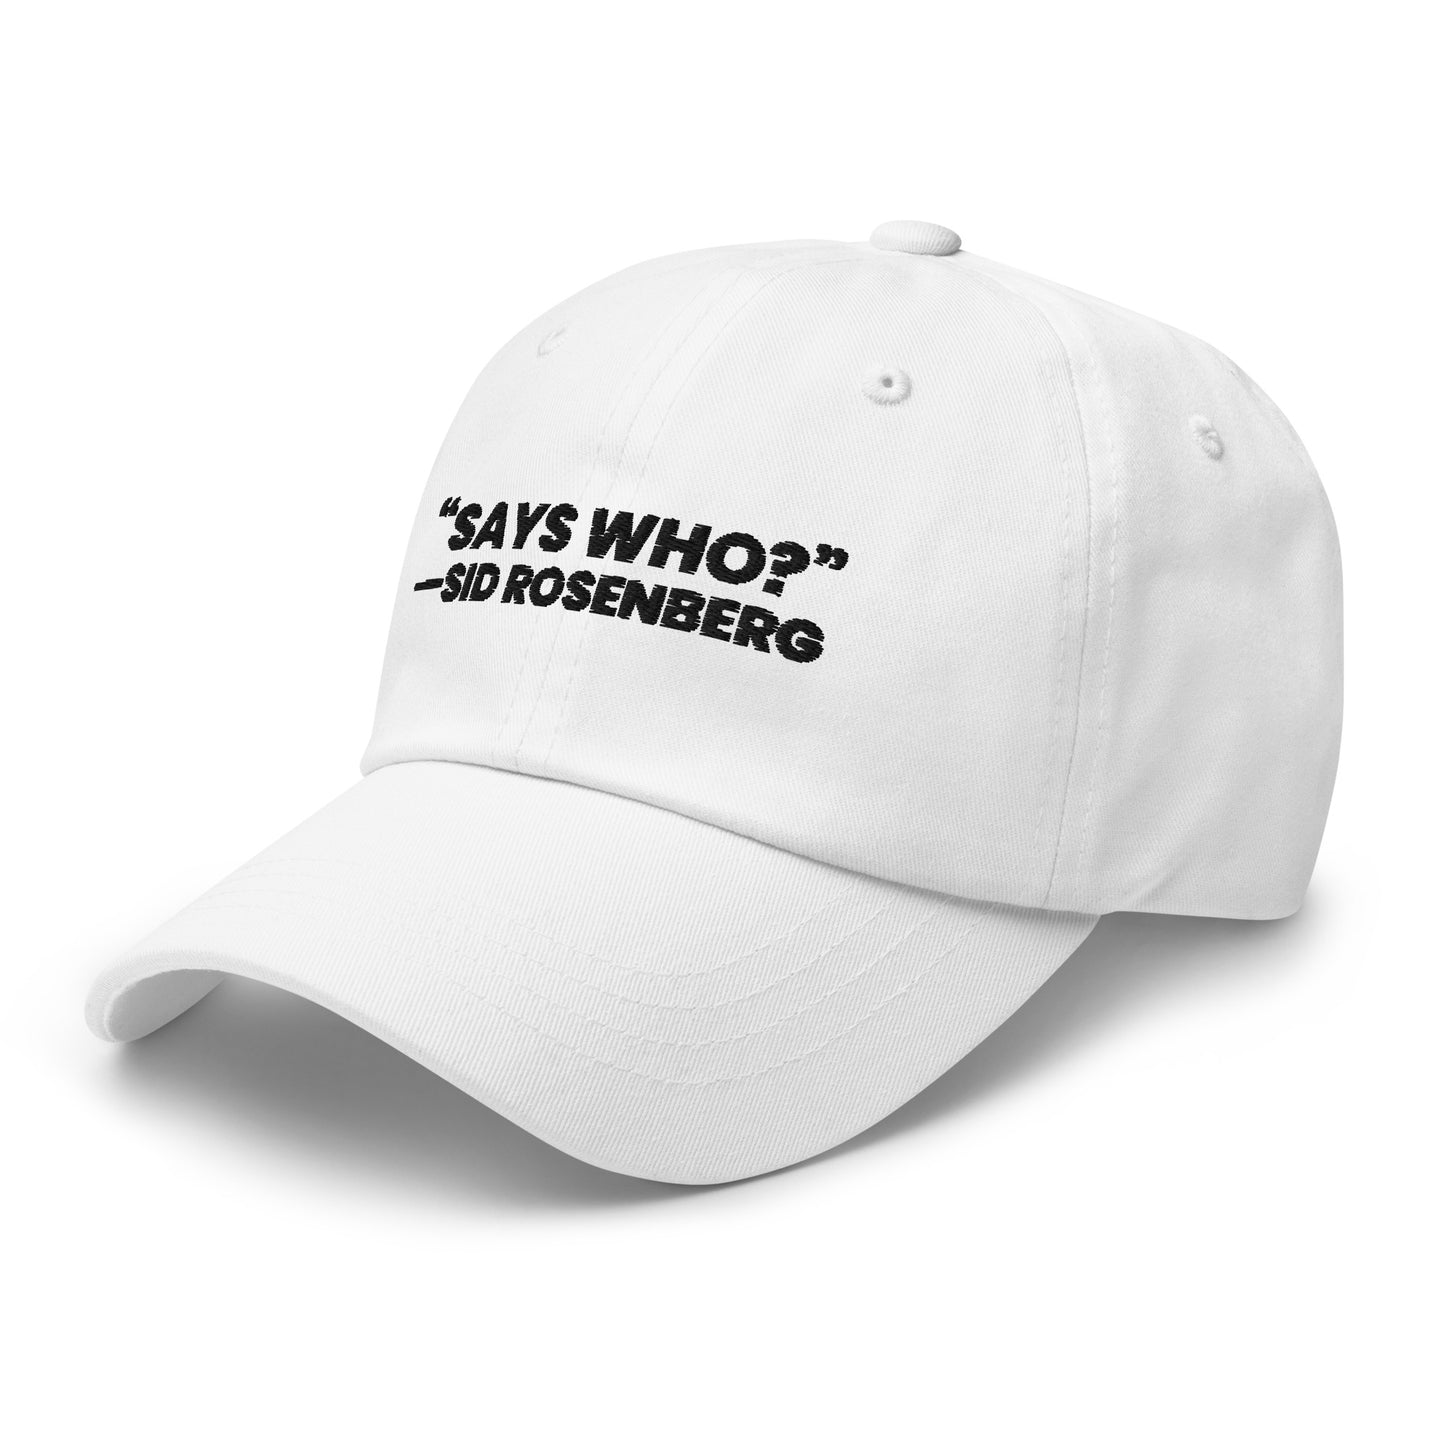 Light "SAYS WHO?" hat